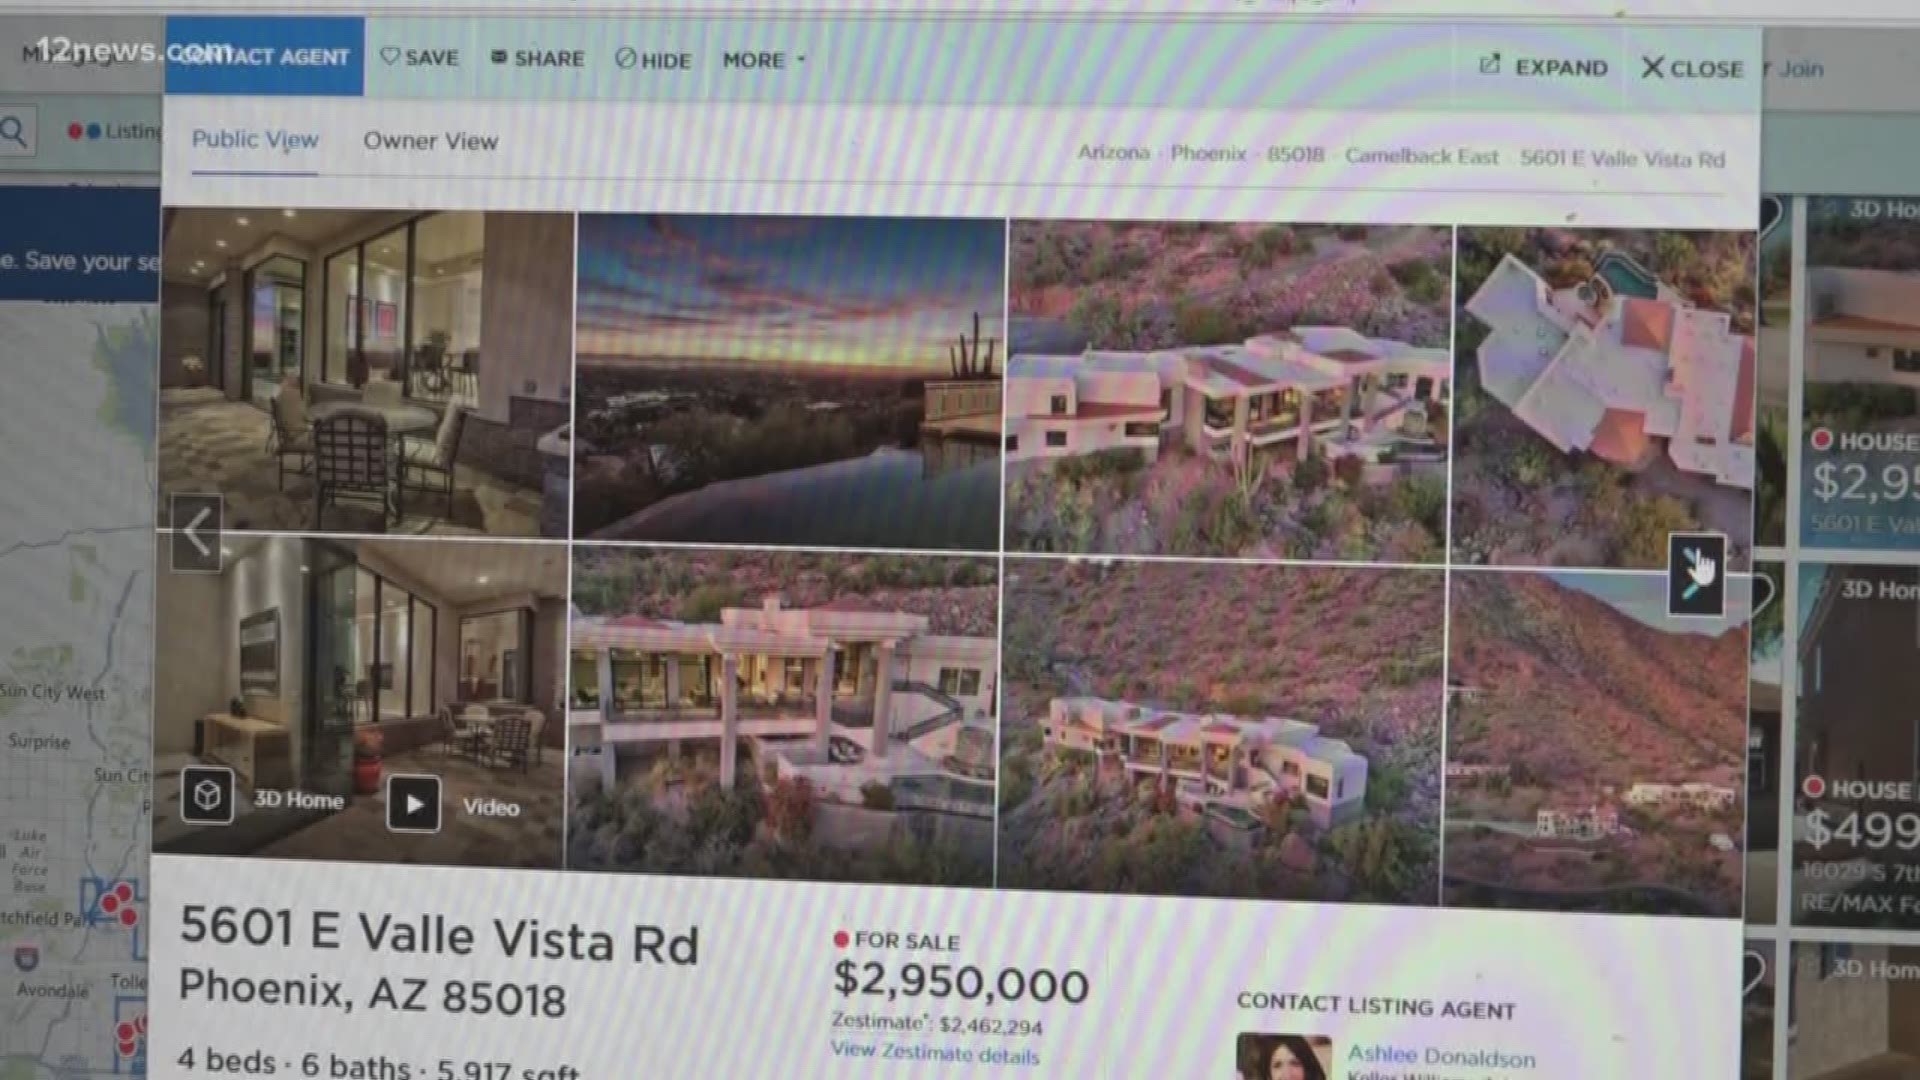 Thieves are searching popular real estate sites to find easy targets.